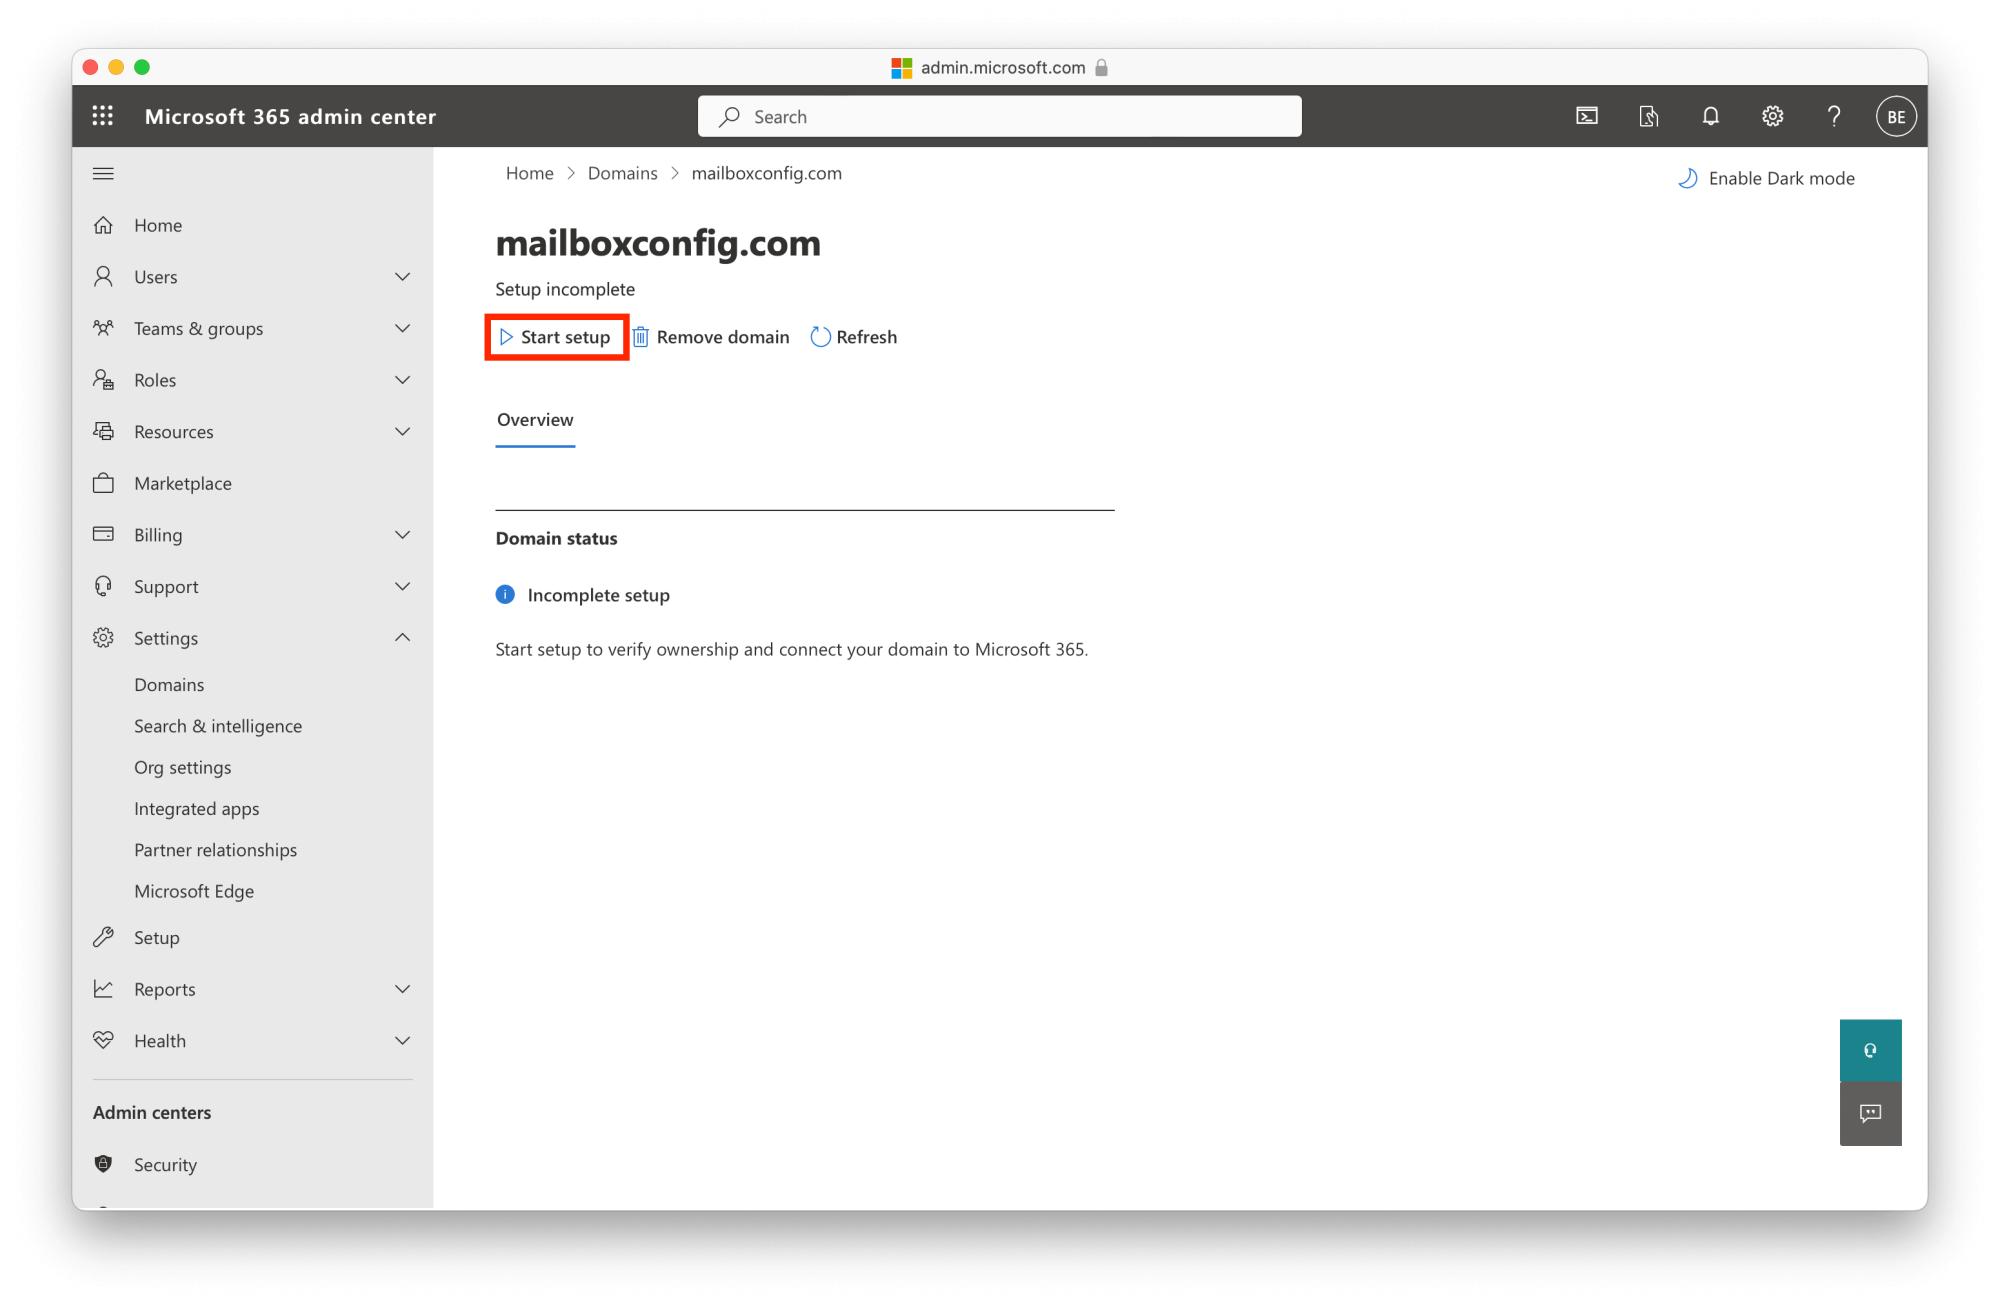 Migrate G Suite to Office 365: Finish domain setup – Step 02